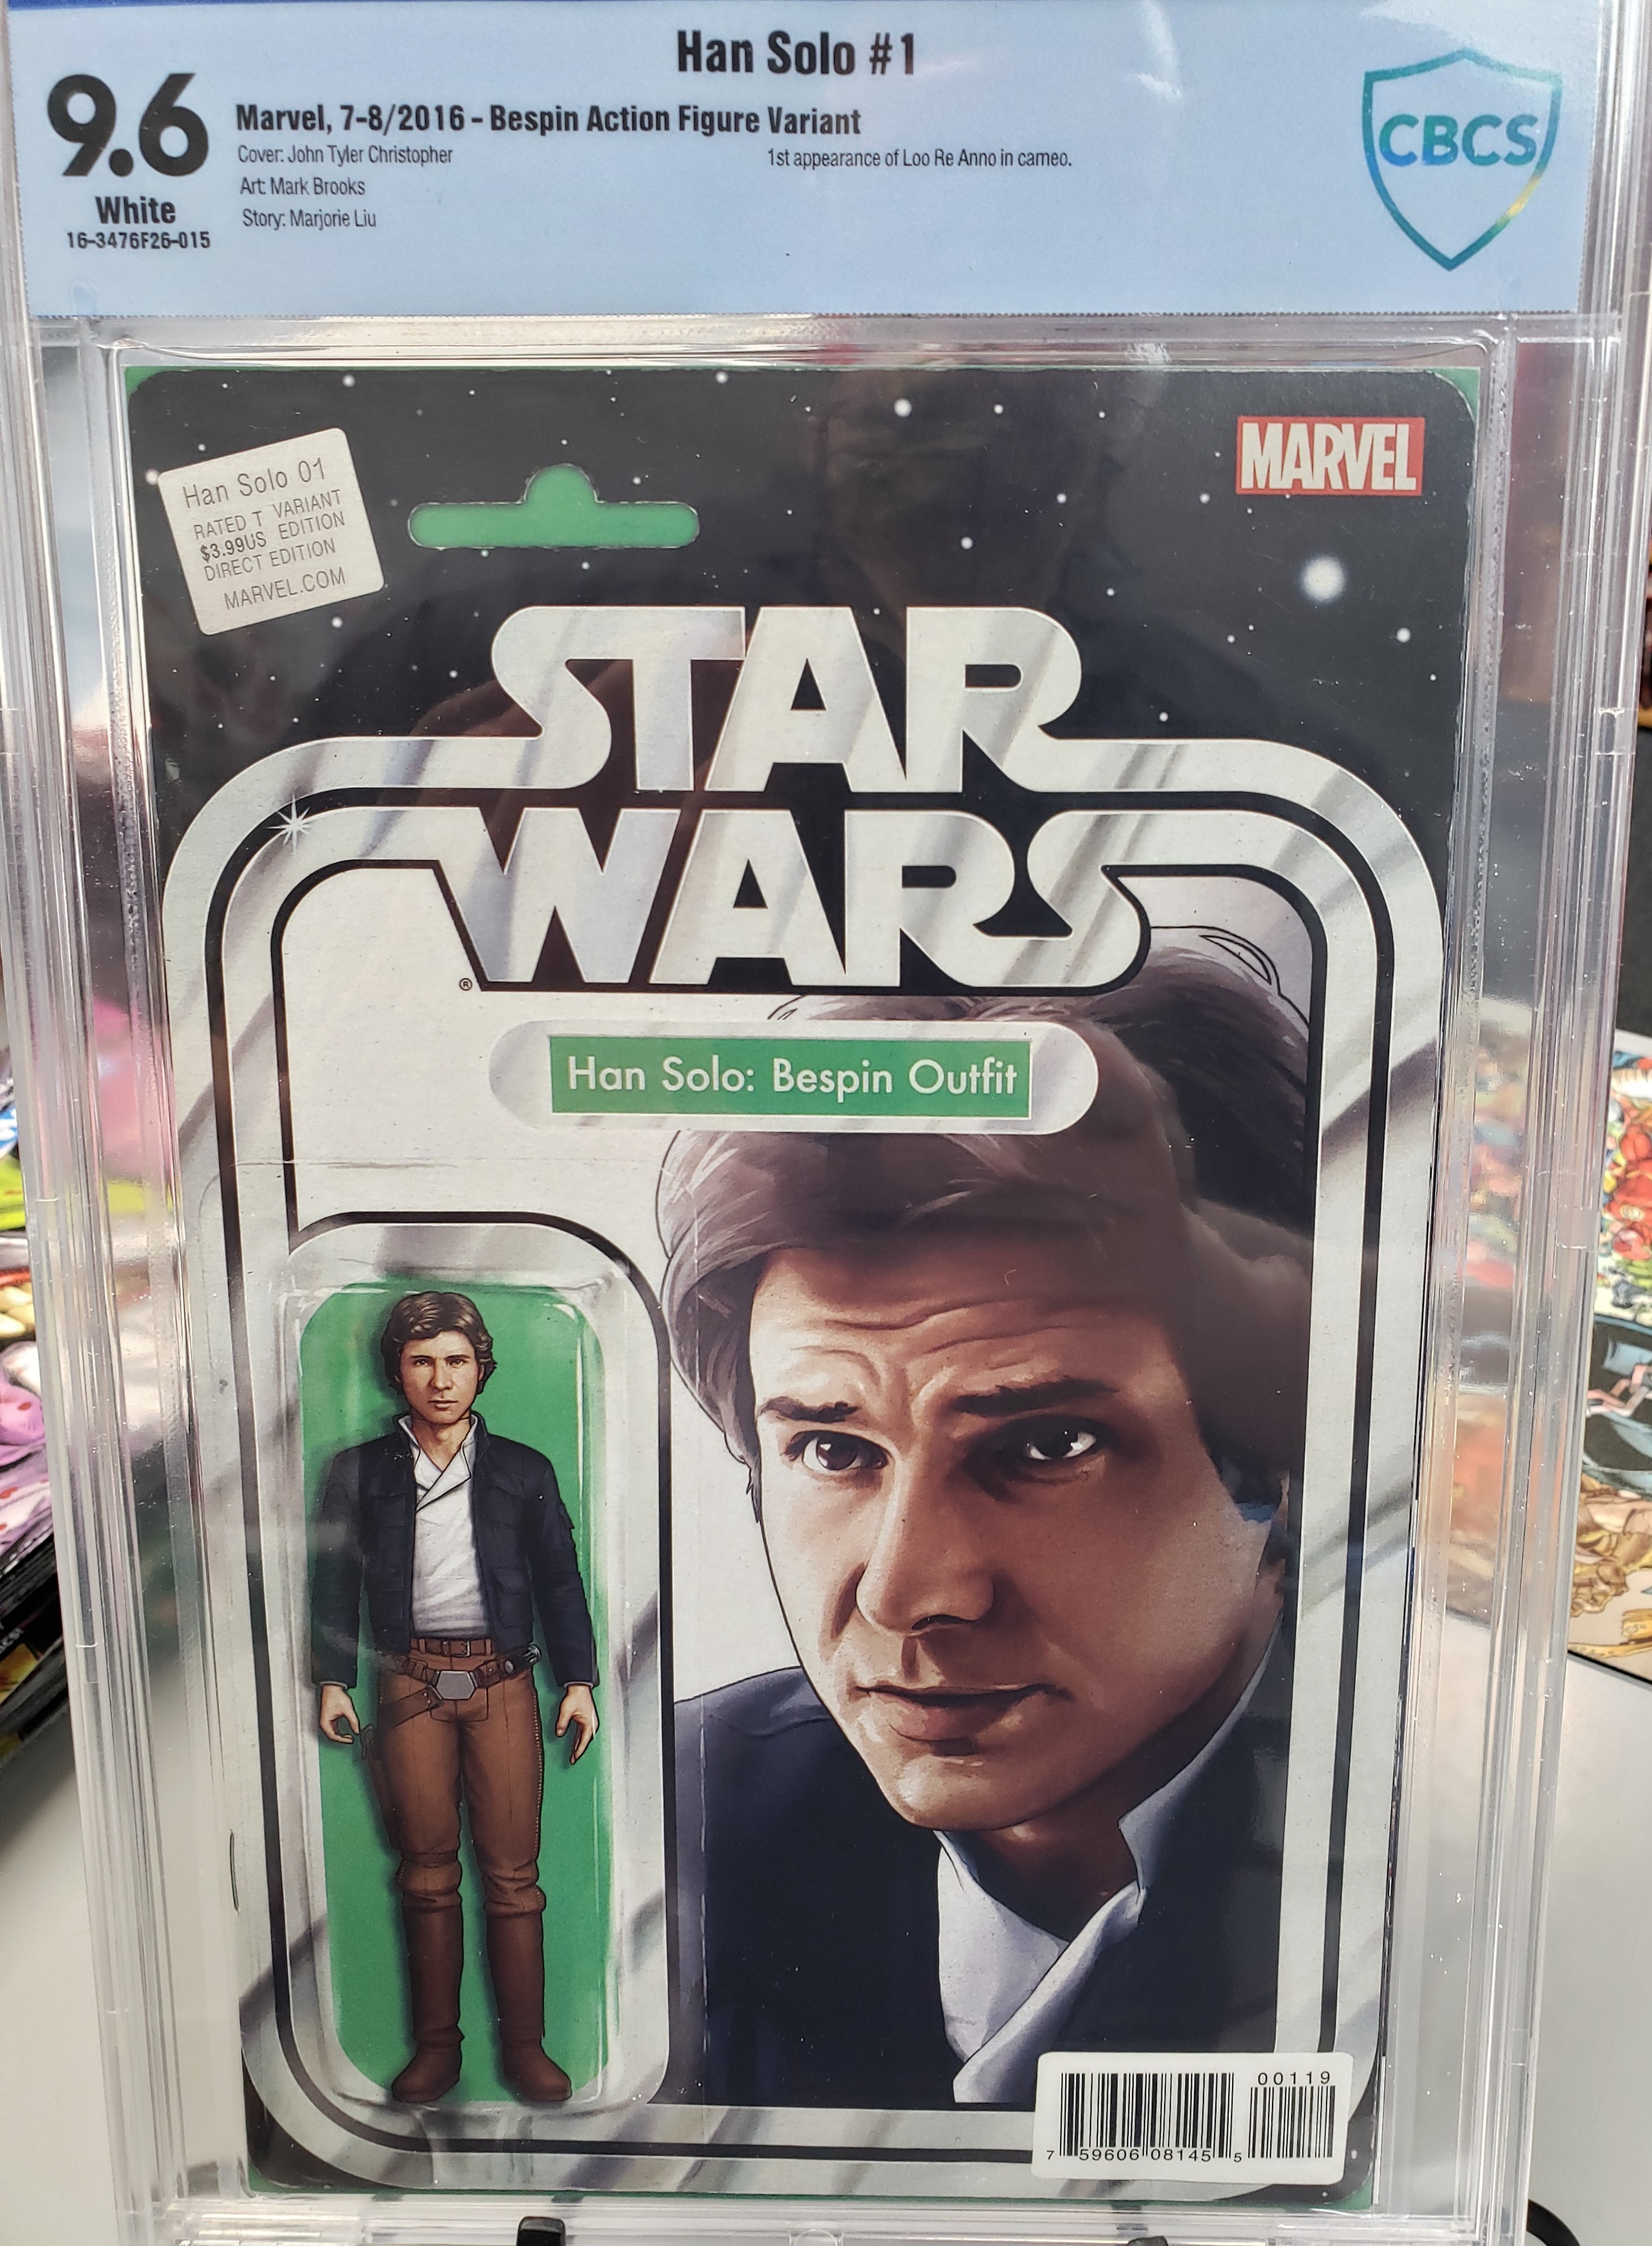 Han Solo #1 Bespin Action Figure Cover Cbcs 9.6